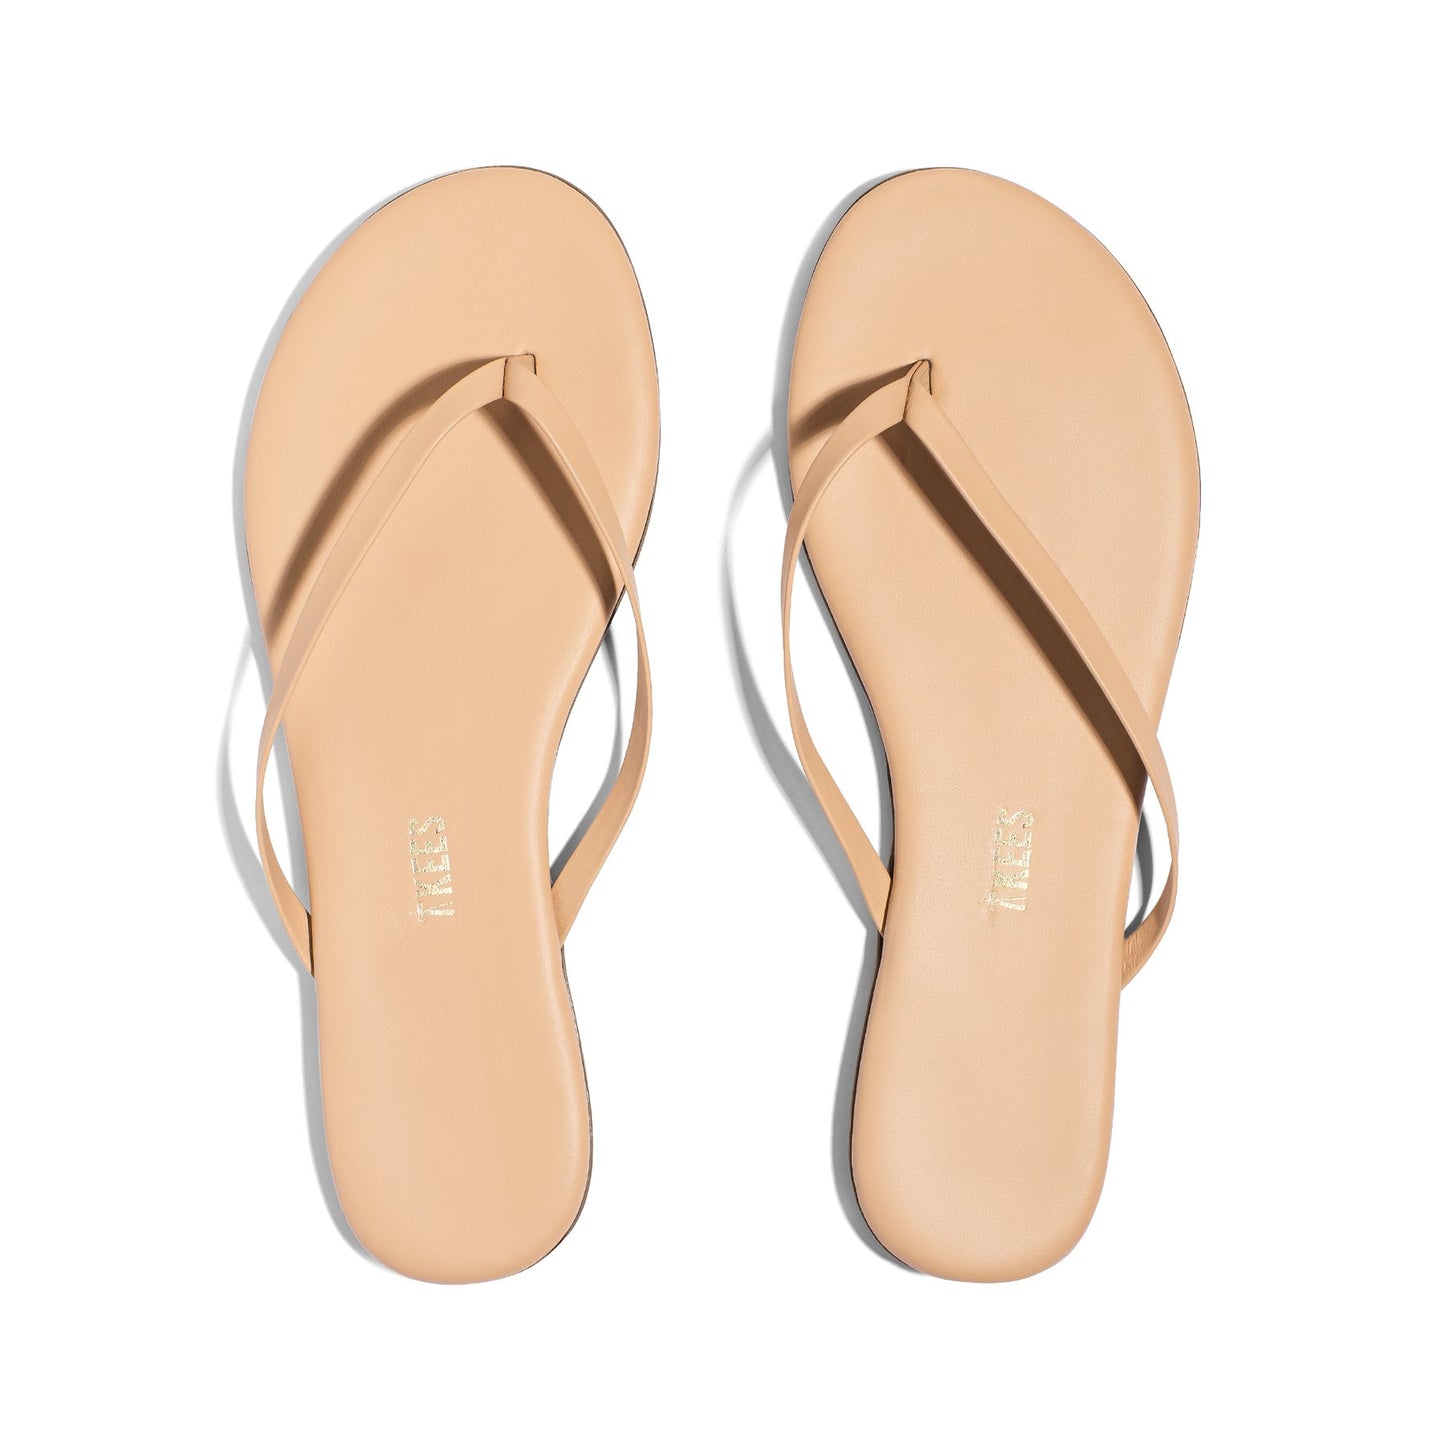 Foundations Flip Flop - Matte Sunkissed TKEES